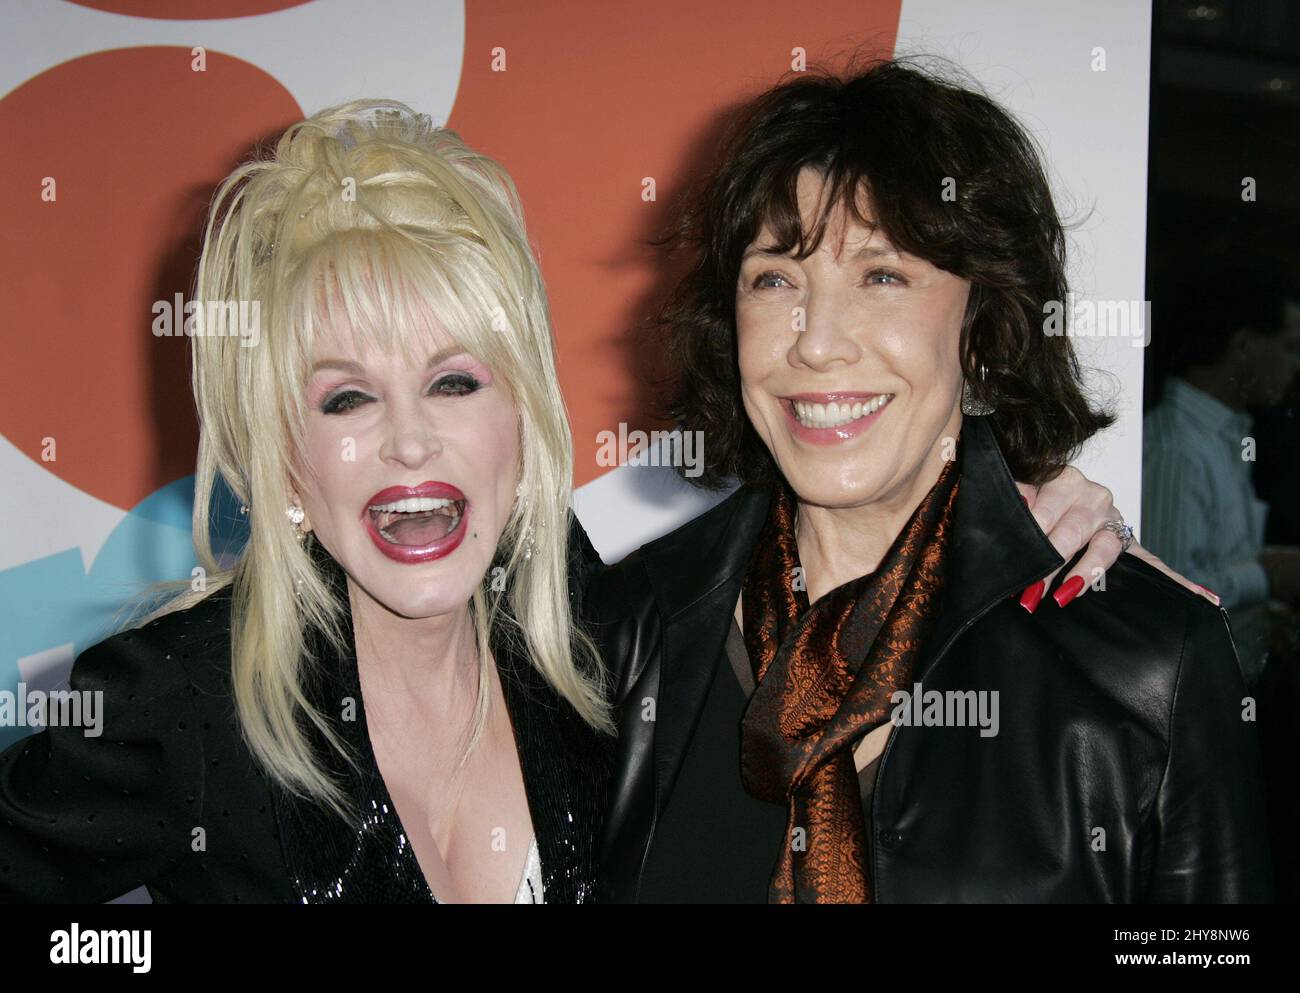 Dolly Parton and Lily Tomlin '9 to 5: The Musical' World Premiere Held at the Ahmanson Theatre Stock Photo